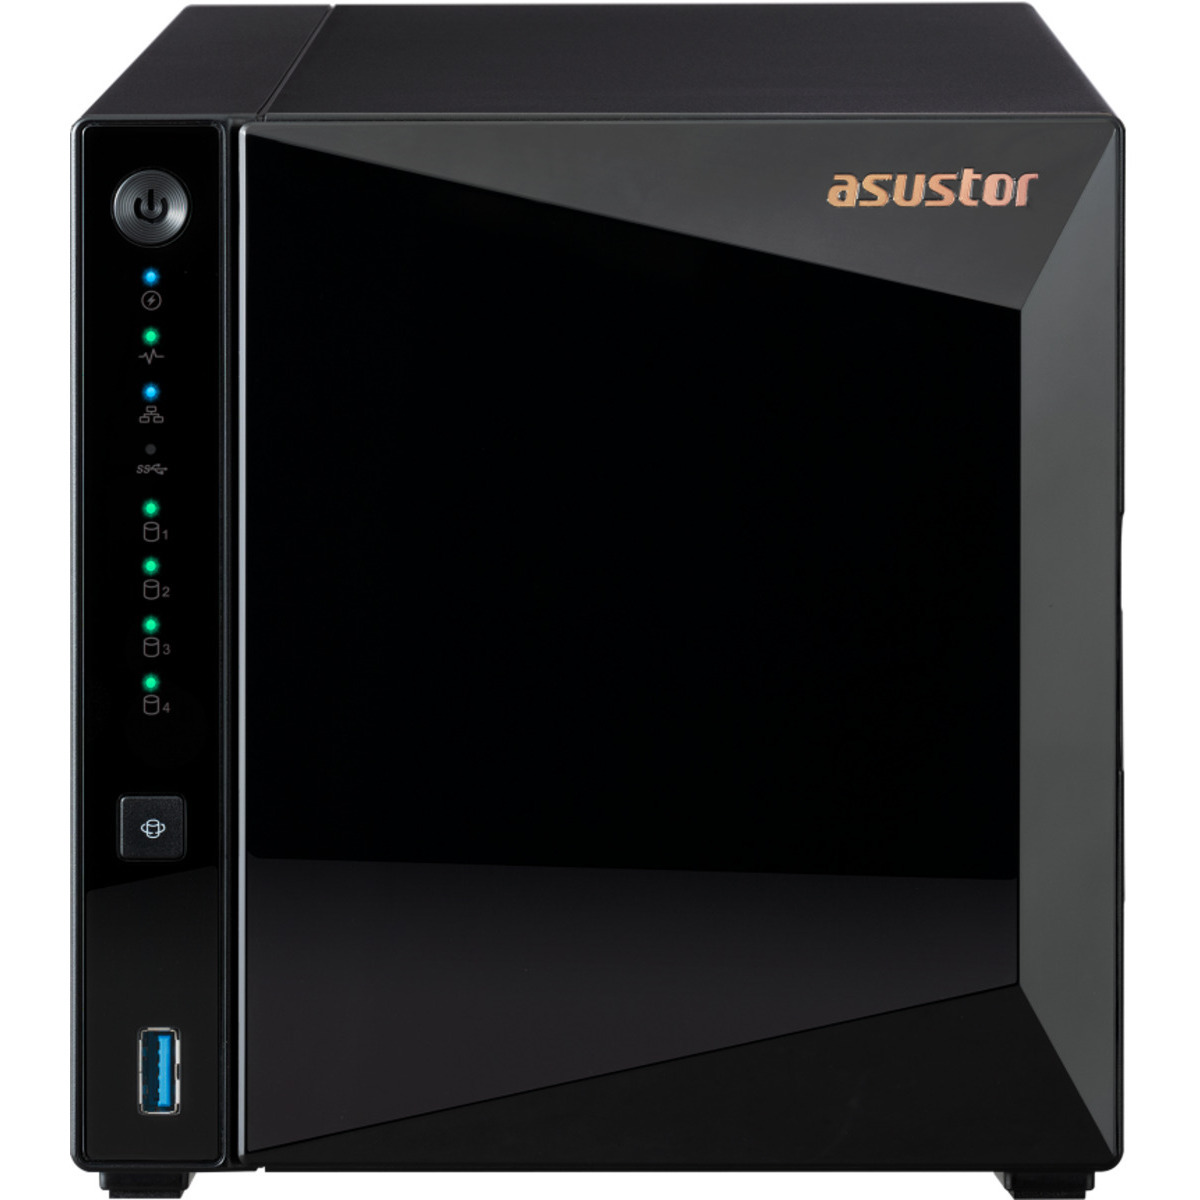 ASUSTOR DRIVESTOR 4 Pro AS3304T 20tb 4-Bay Desktop Personal / Basic Home / Small Office NAS - Network Attached Storage Device 2x10tb Seagate IronWolf Pro ST10000NT001 3.5 7200rpm SATA 6Gb/s HDD NAS Class Drives Installed - Burn-In Tested - ON SALE DRIVESTOR 4 Pro AS3304T